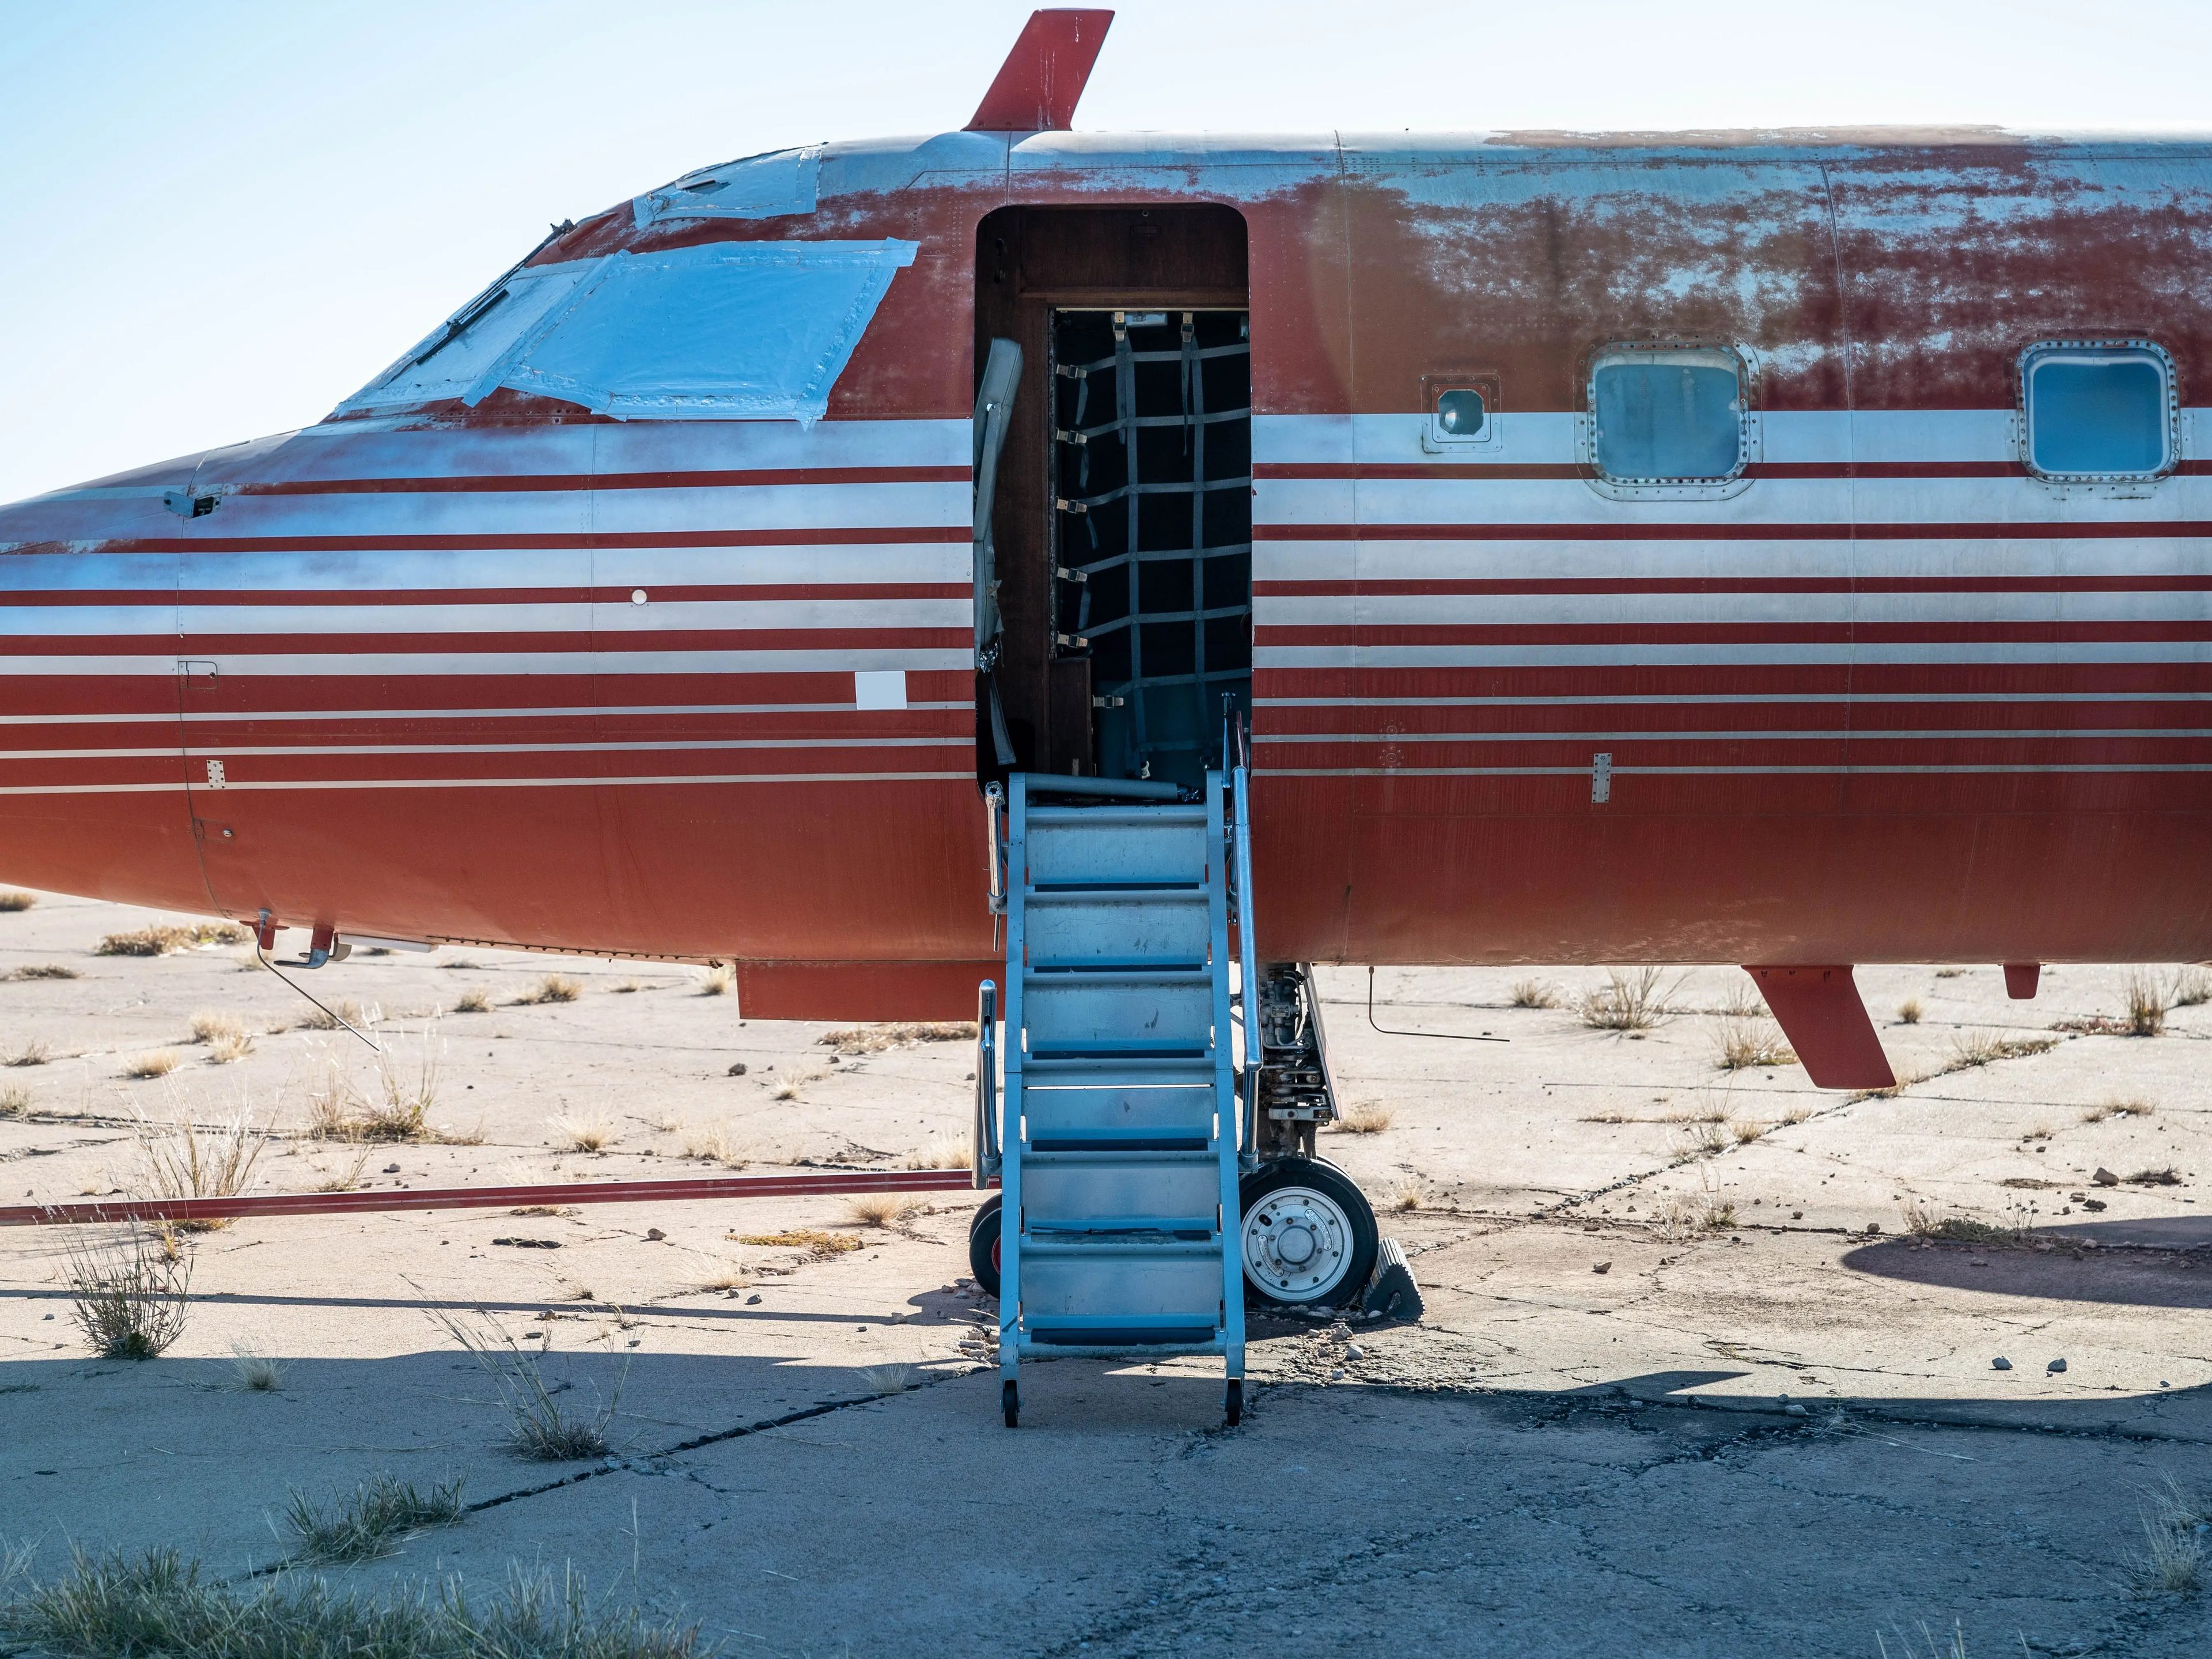 Photo of a private plane with the stairs shown